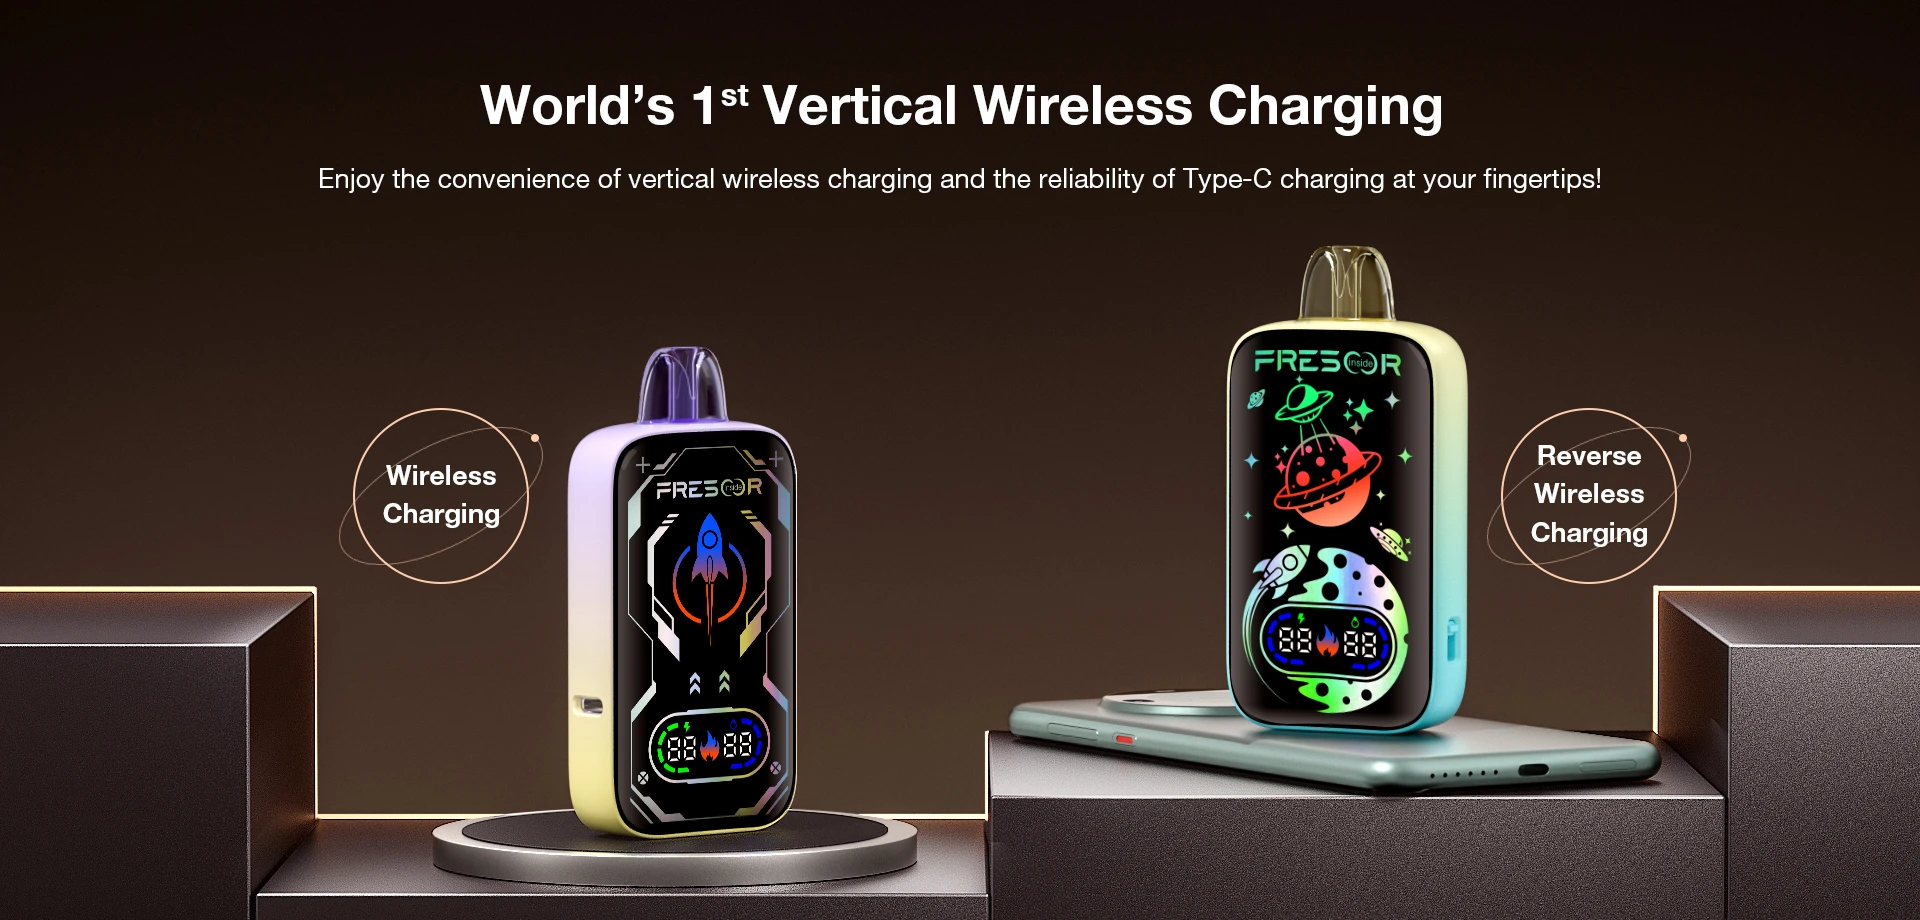 World's 1st Vertical Wireless Charging  Enjoy the convenience of vertical wireless charging and the reliability of Type-C charging at your fingertips!  Wireless Charging Reverse Wireless Charging